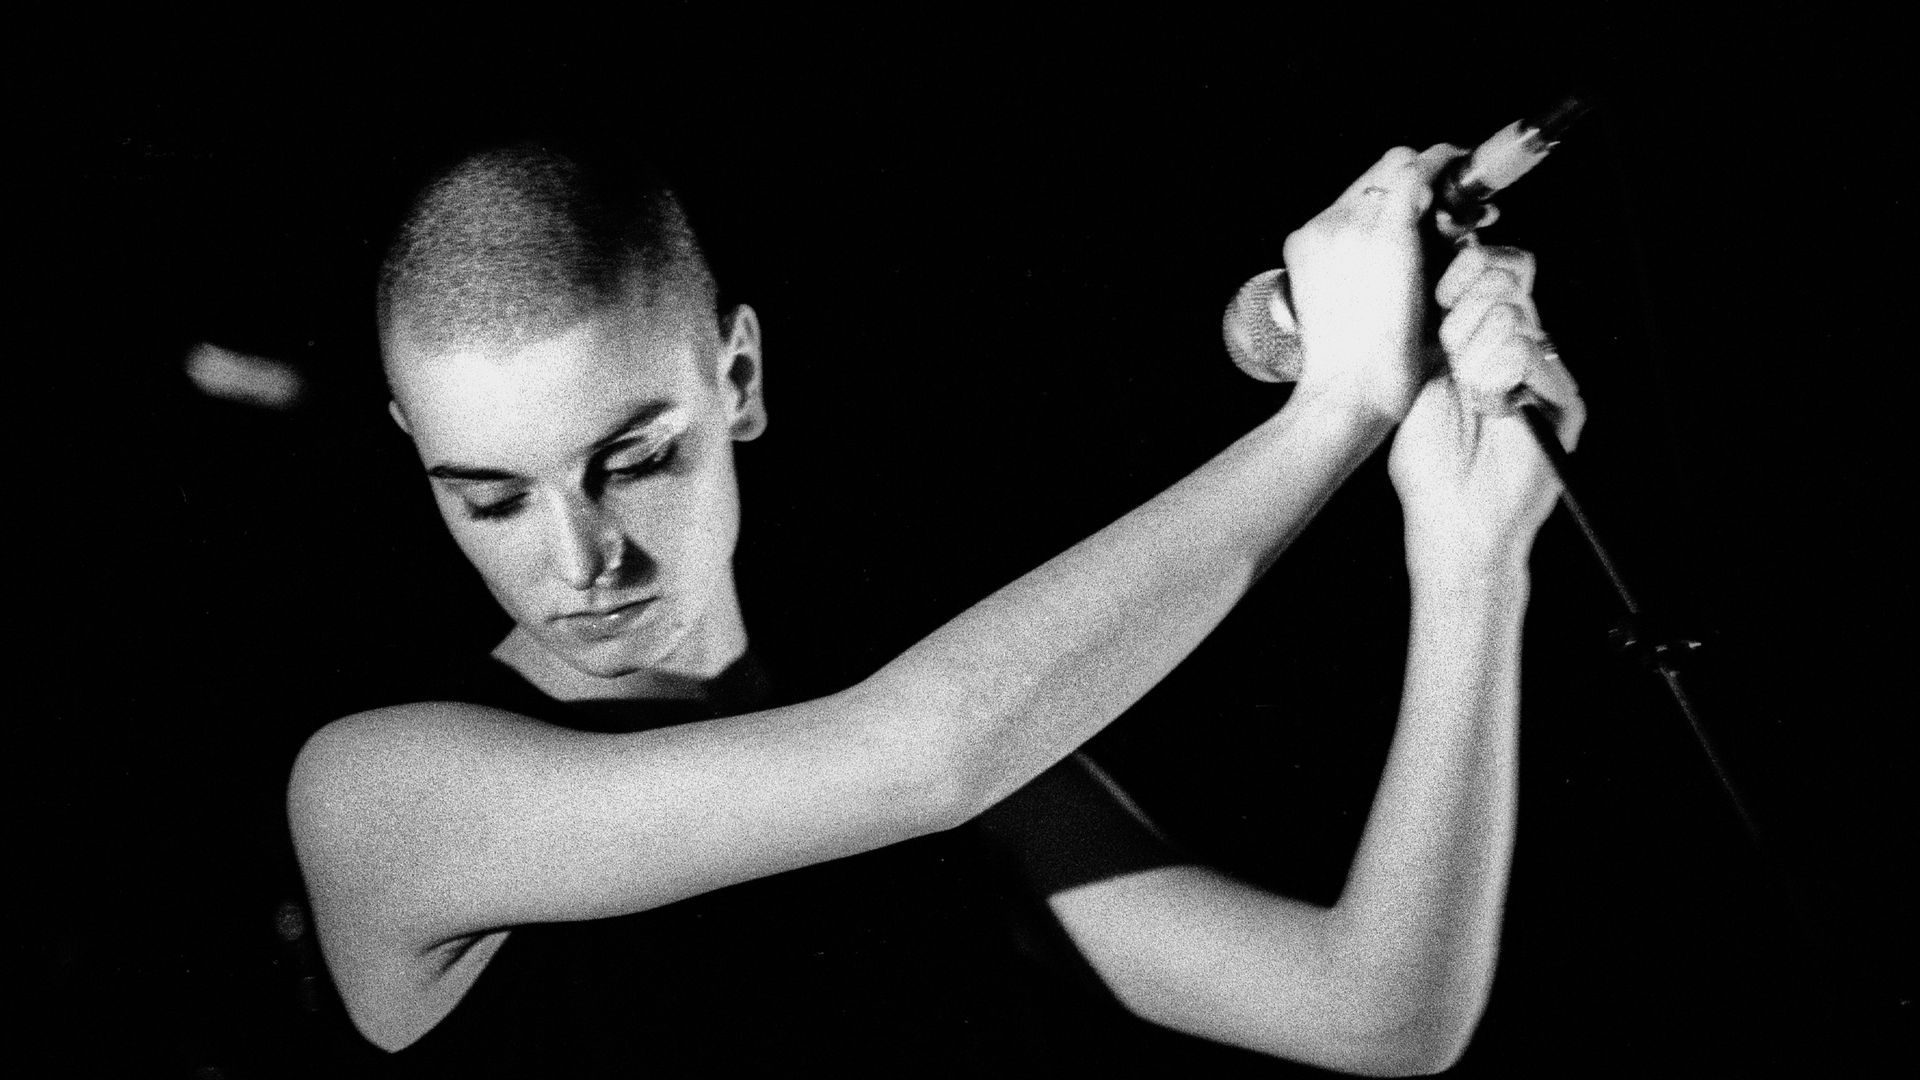 Irish singer Sinead O'Connor performs at Paradiso, Amsterdam, Netherlands, 16 March 1988